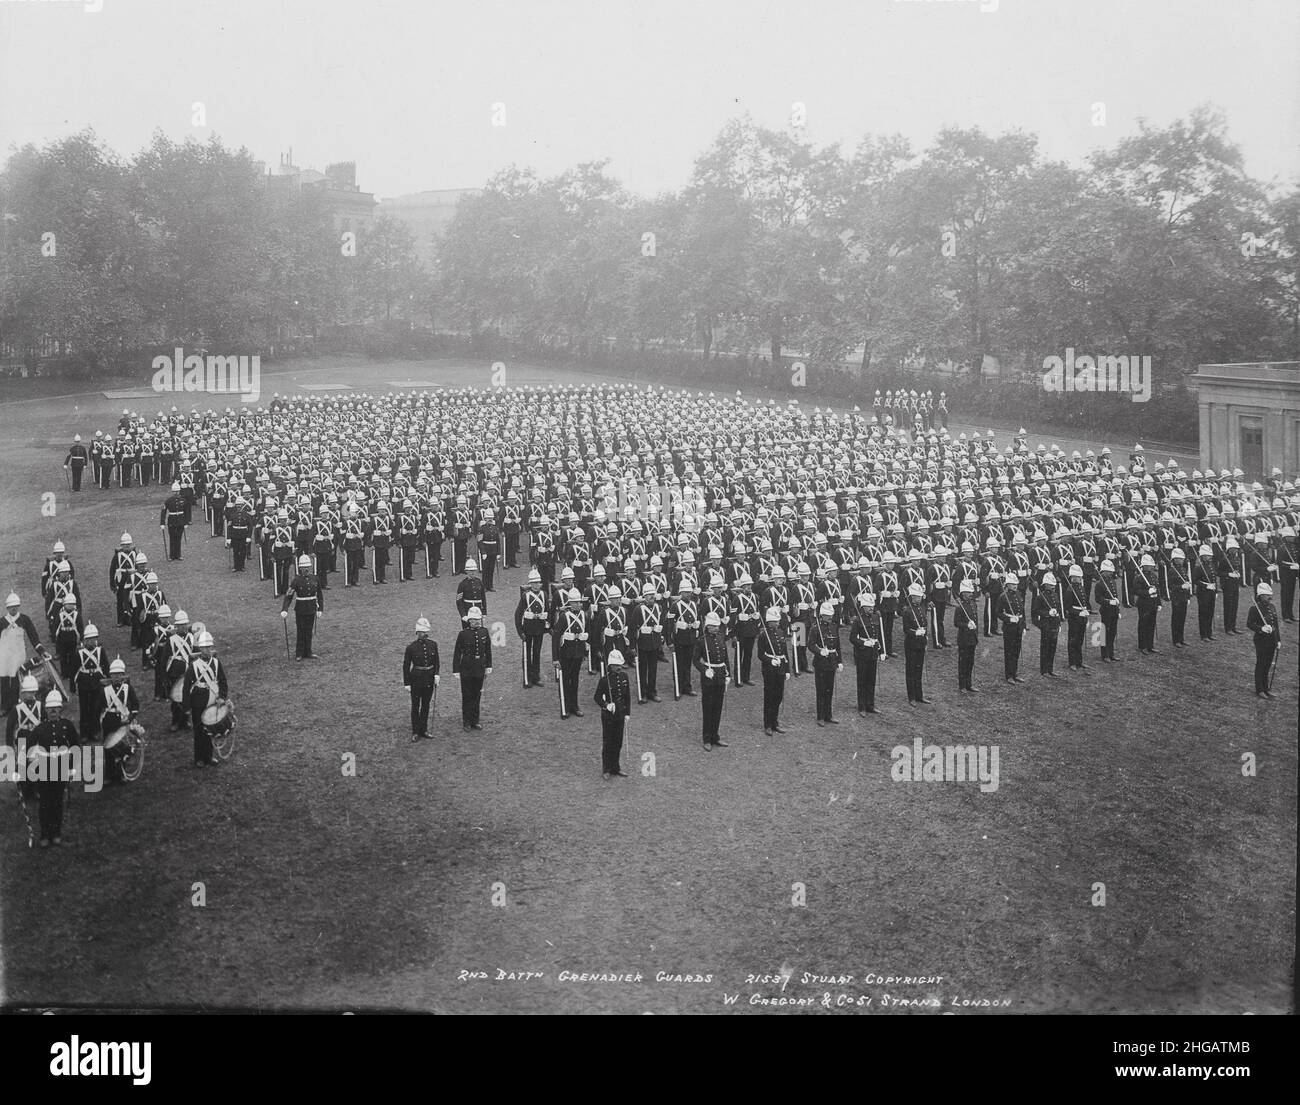 Vintage late 19th century photograph: 1890's British Army Regiment: 2nd Battalion Grenadier Guards Stock Photo